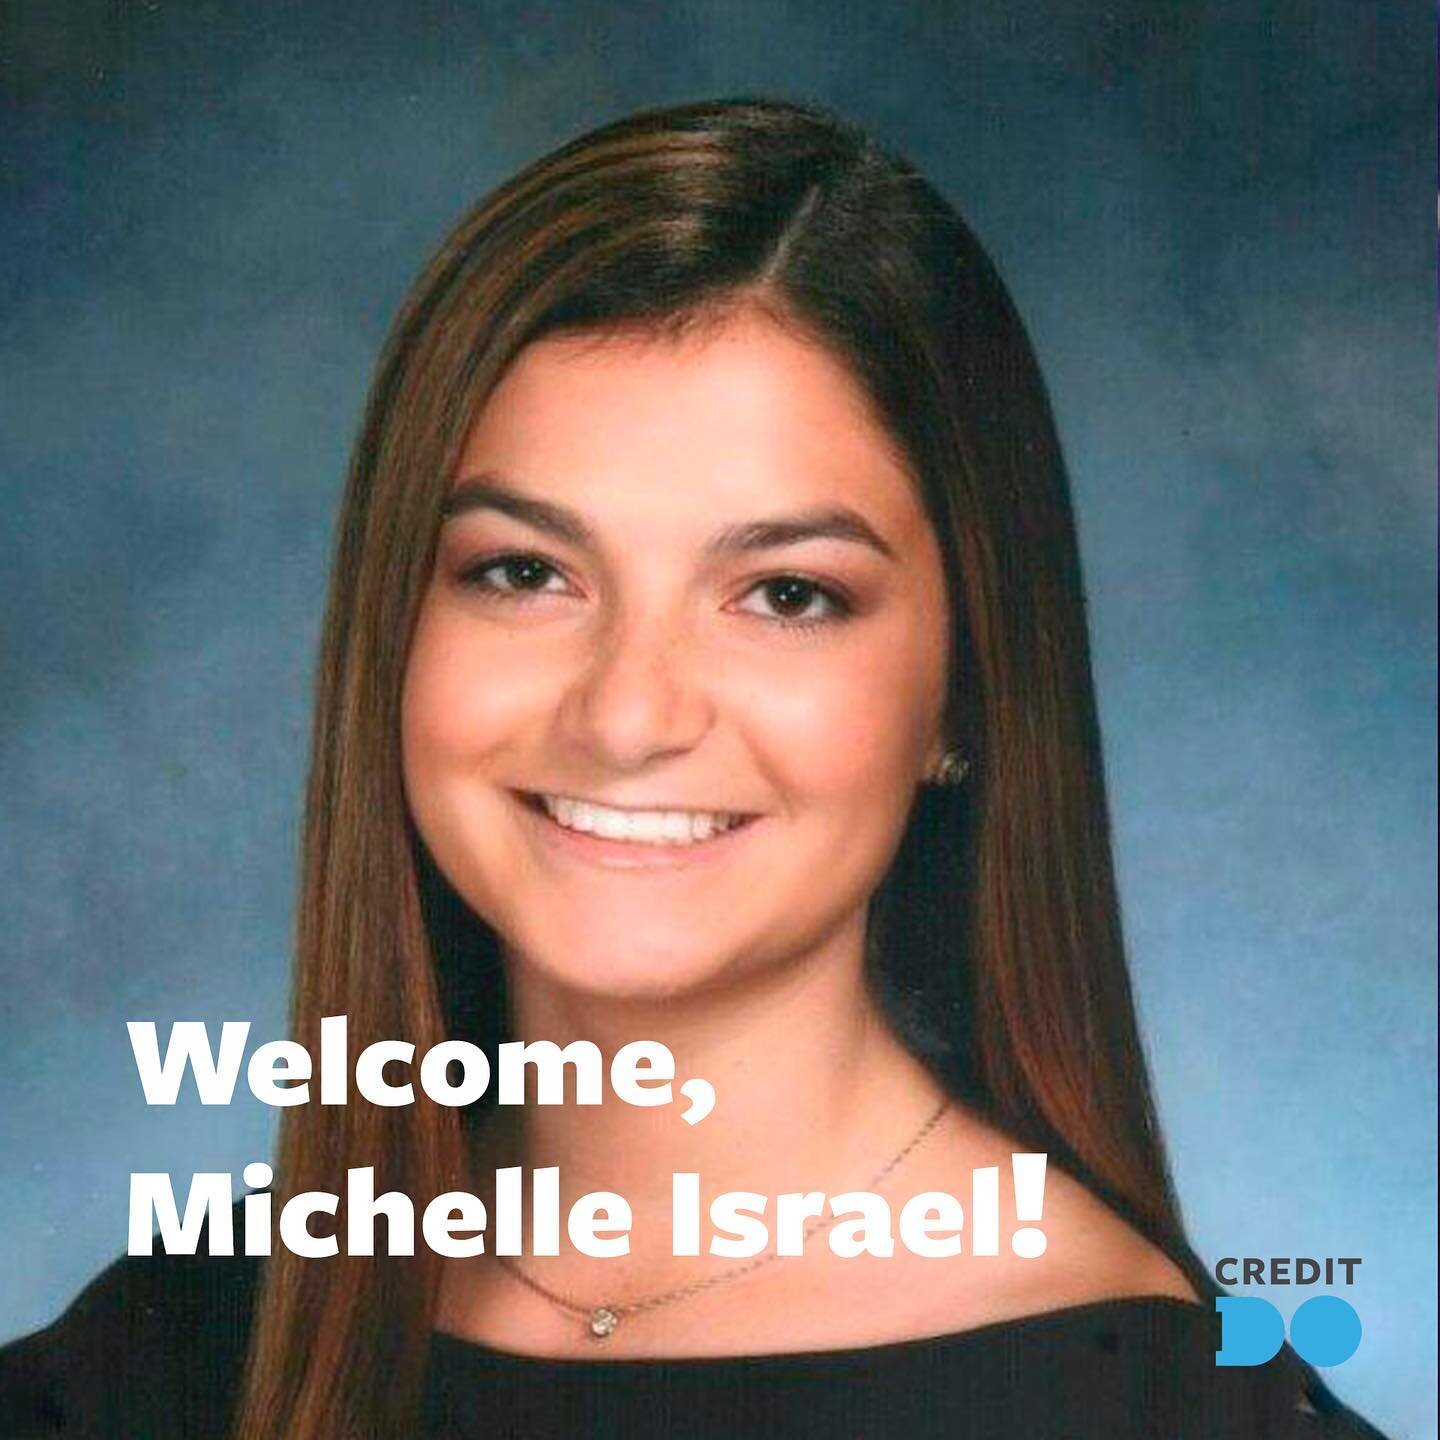 Join us as we welcome our new Marketing &amp; Communications Intern, Michelle Israel! 

Why Credit Do?
I have a passion for working with young kids and making an impact on the trajectory of their lives. Financial literacy is important to learn at a y